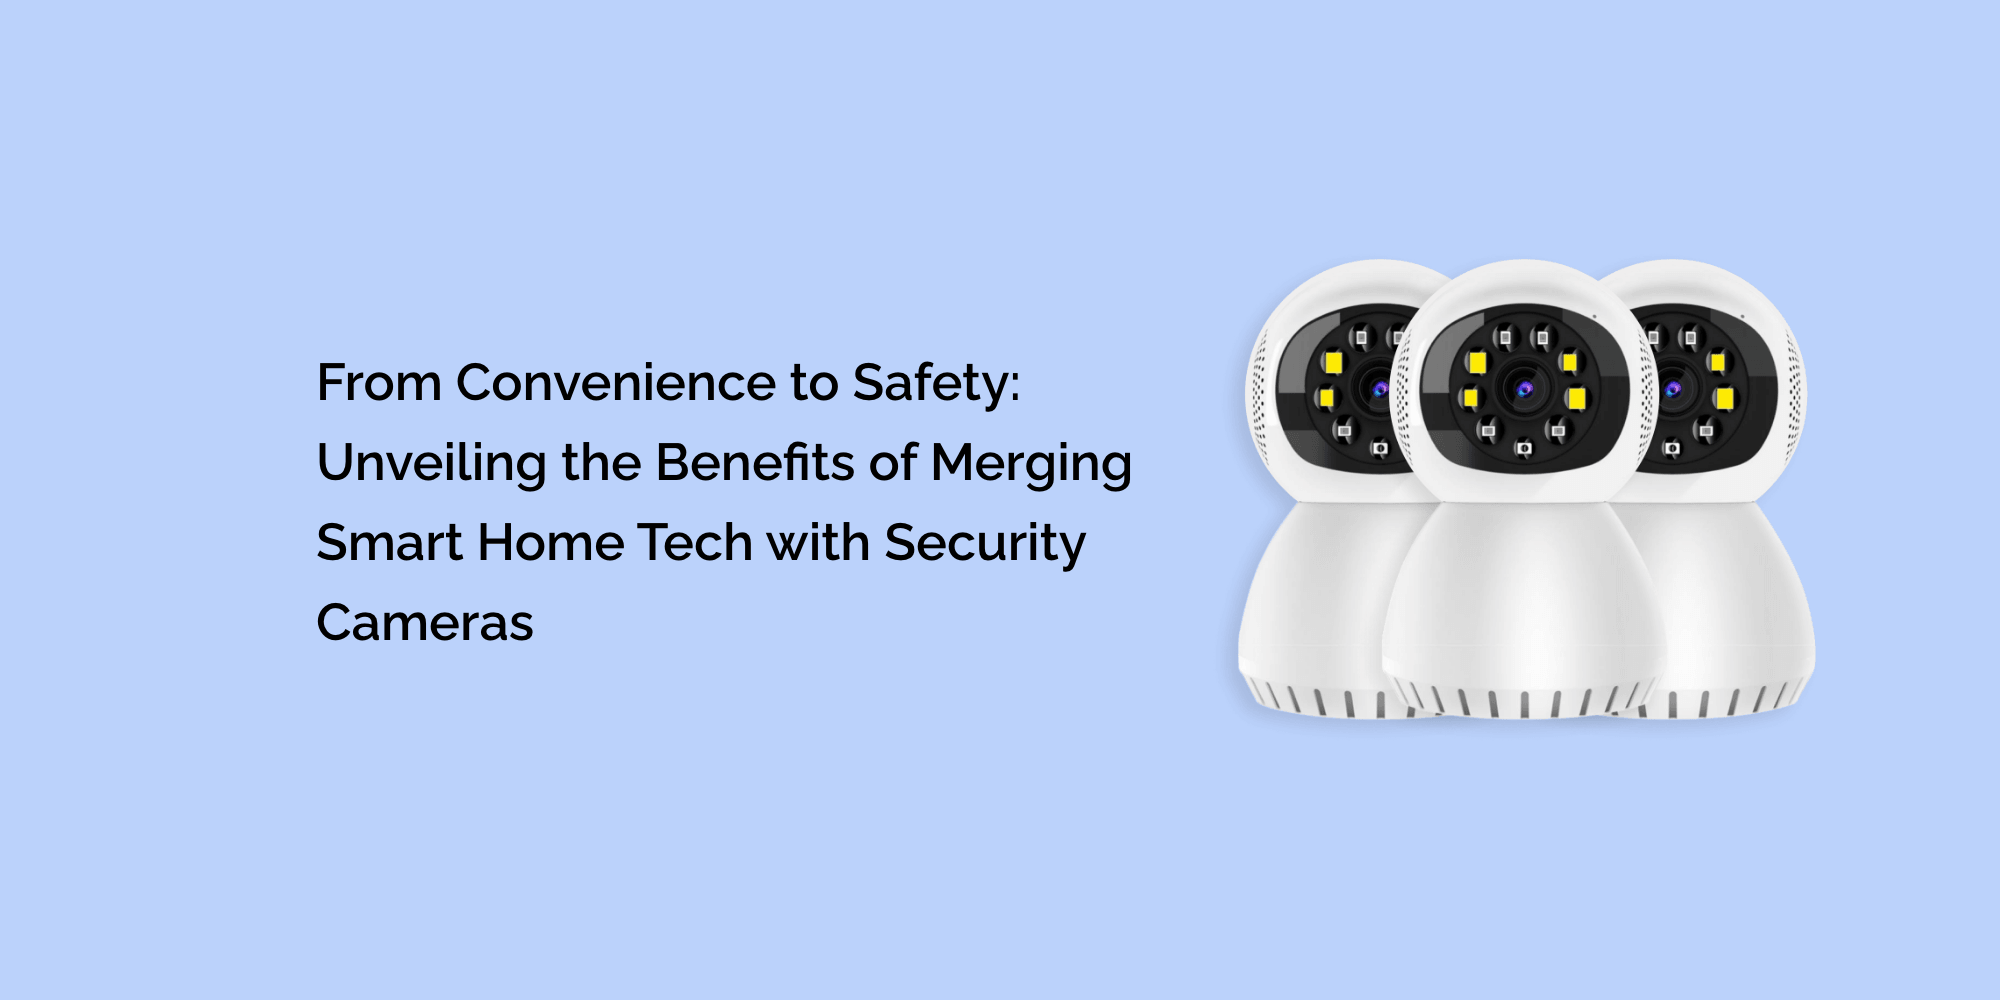 From Convenience to Safety: Unveiling the Benefits of Merging Smart Home Tech with Security Cameras